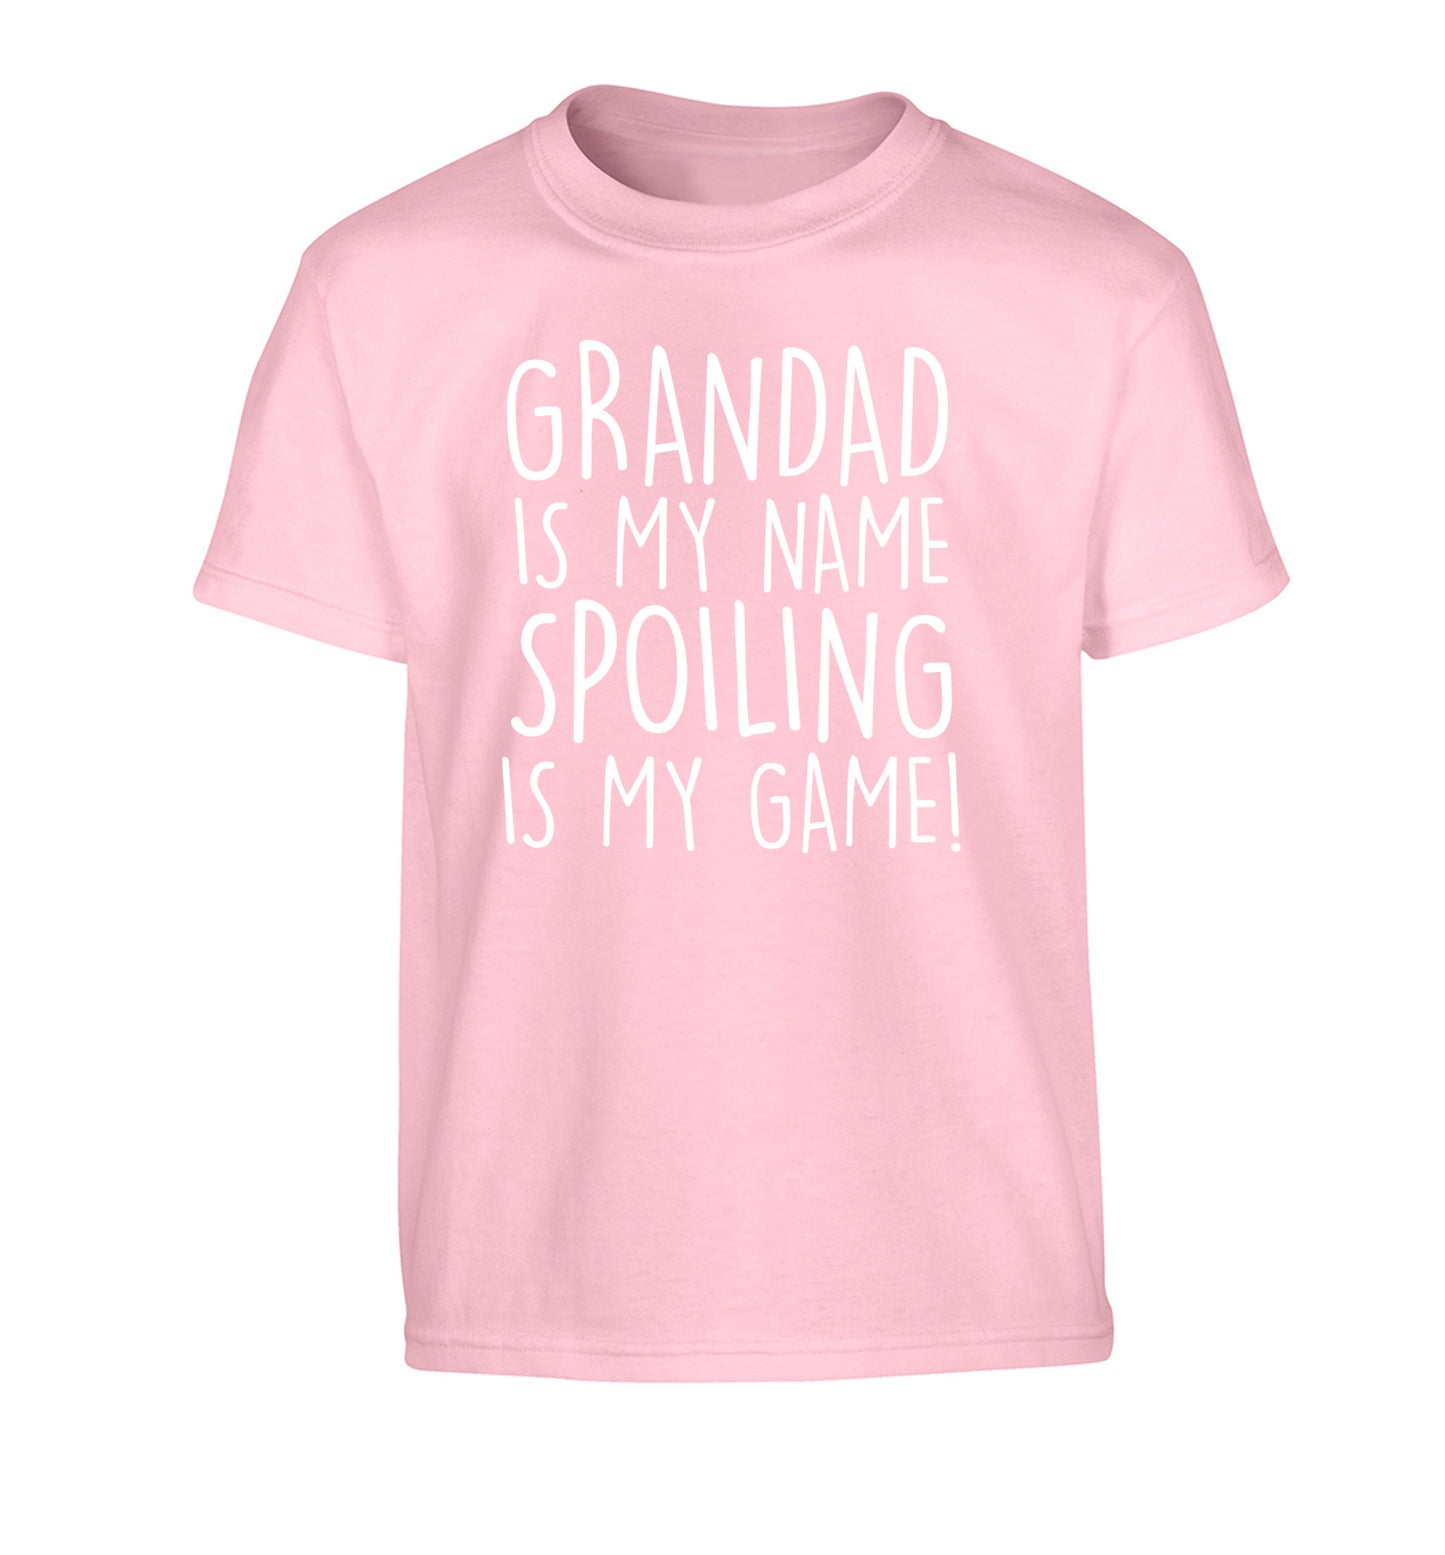 Grandad is my name, spoiling is my game Children's light pink Tshirt 12-14 Years